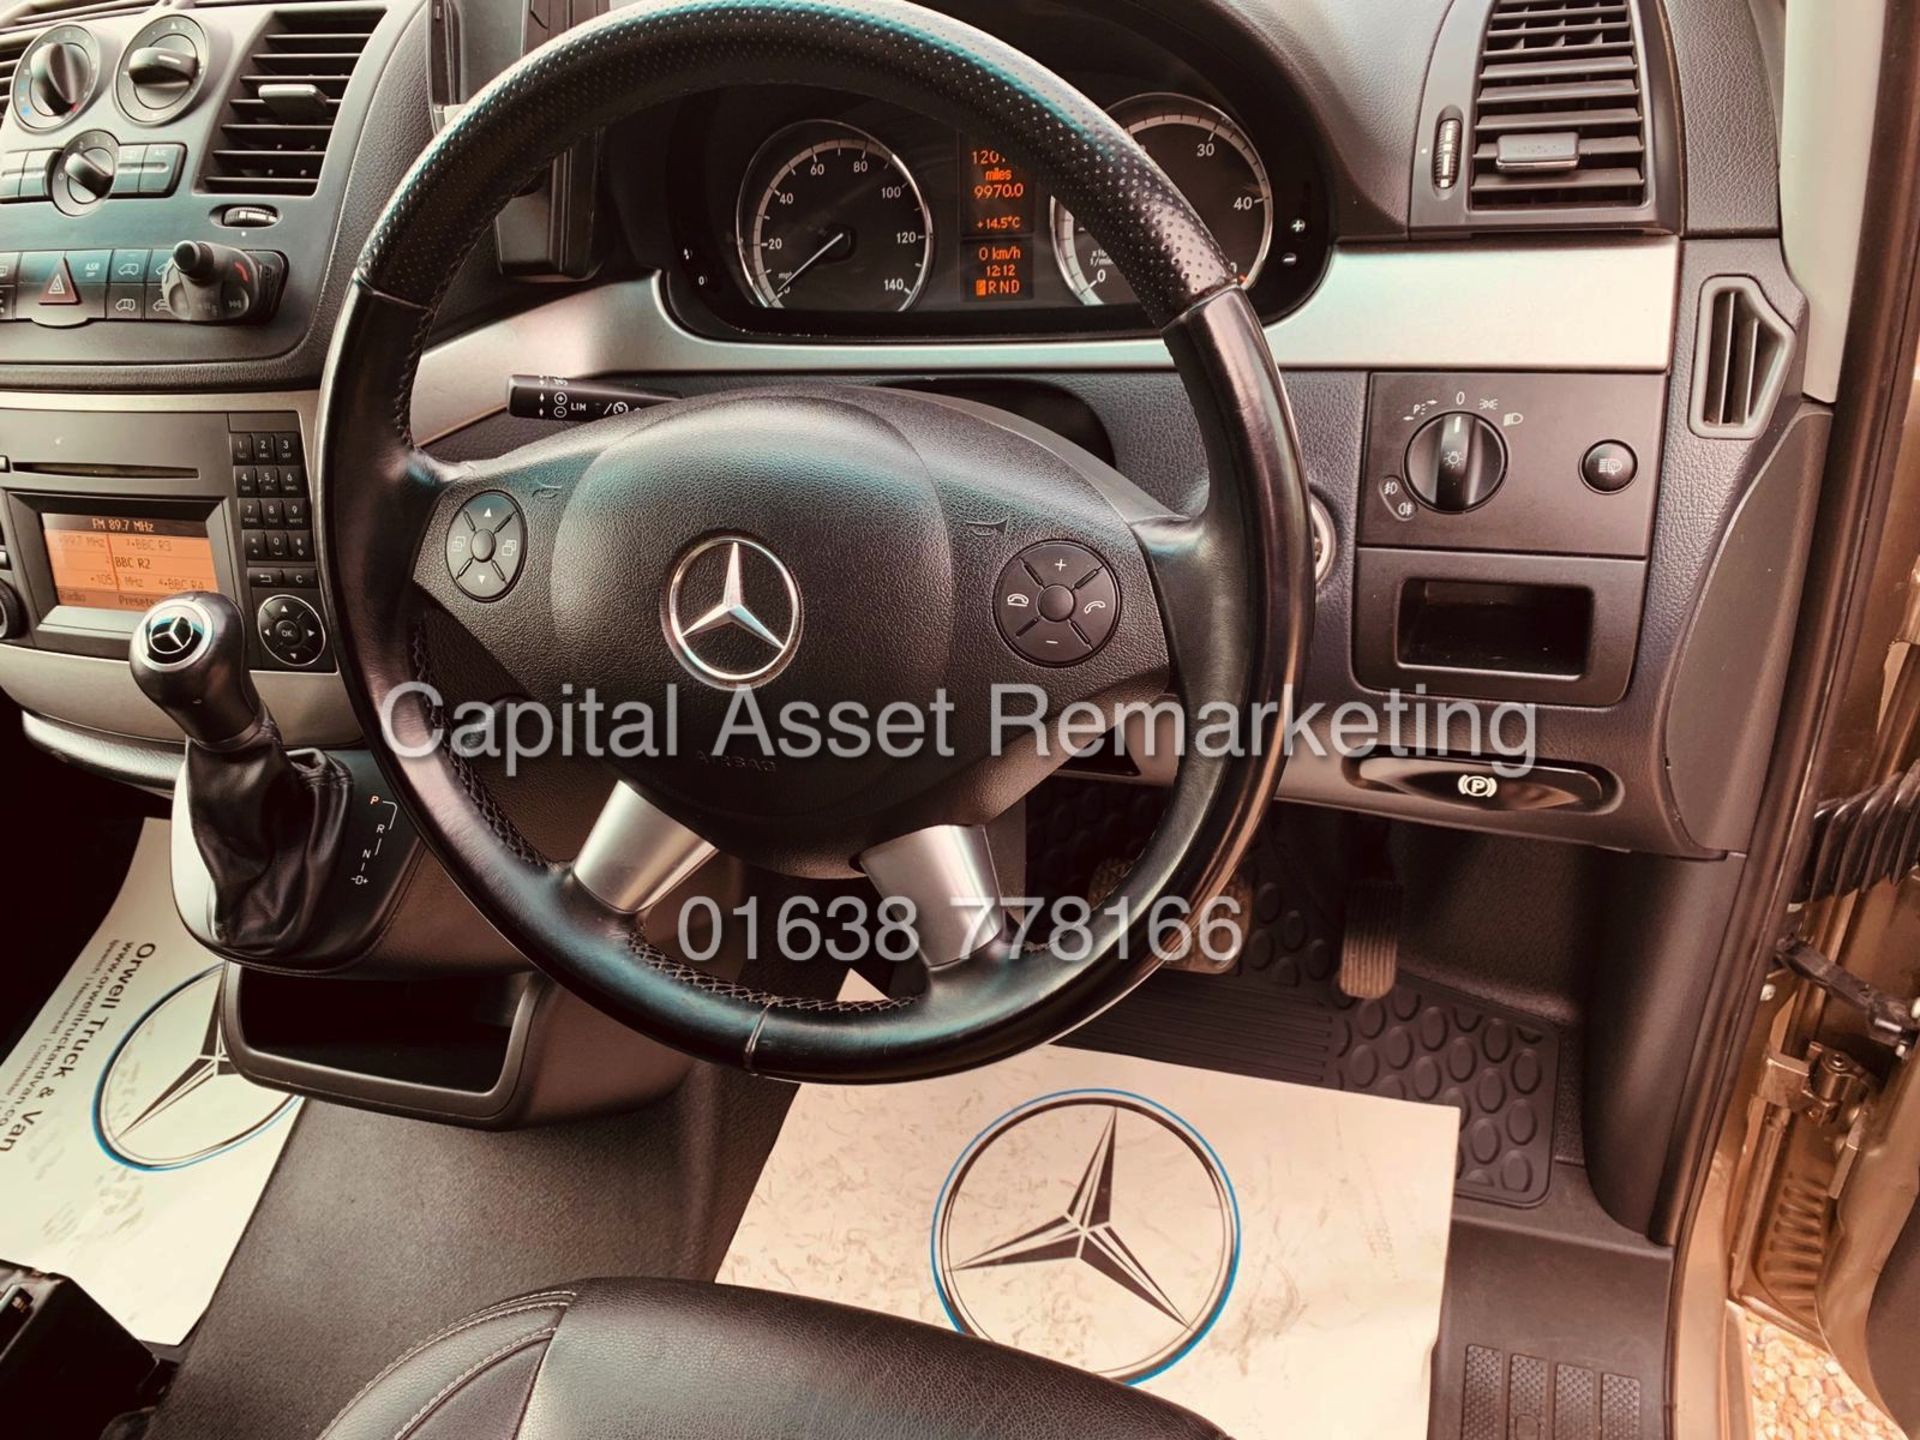 MERCEDES VITO 122CDI *SPORT-X SPEC* 8 SEATER DUALINER LWB (12 REG) 1 OWNER FSH -AIR CON-ALL THE TOYS - Image 11 of 19